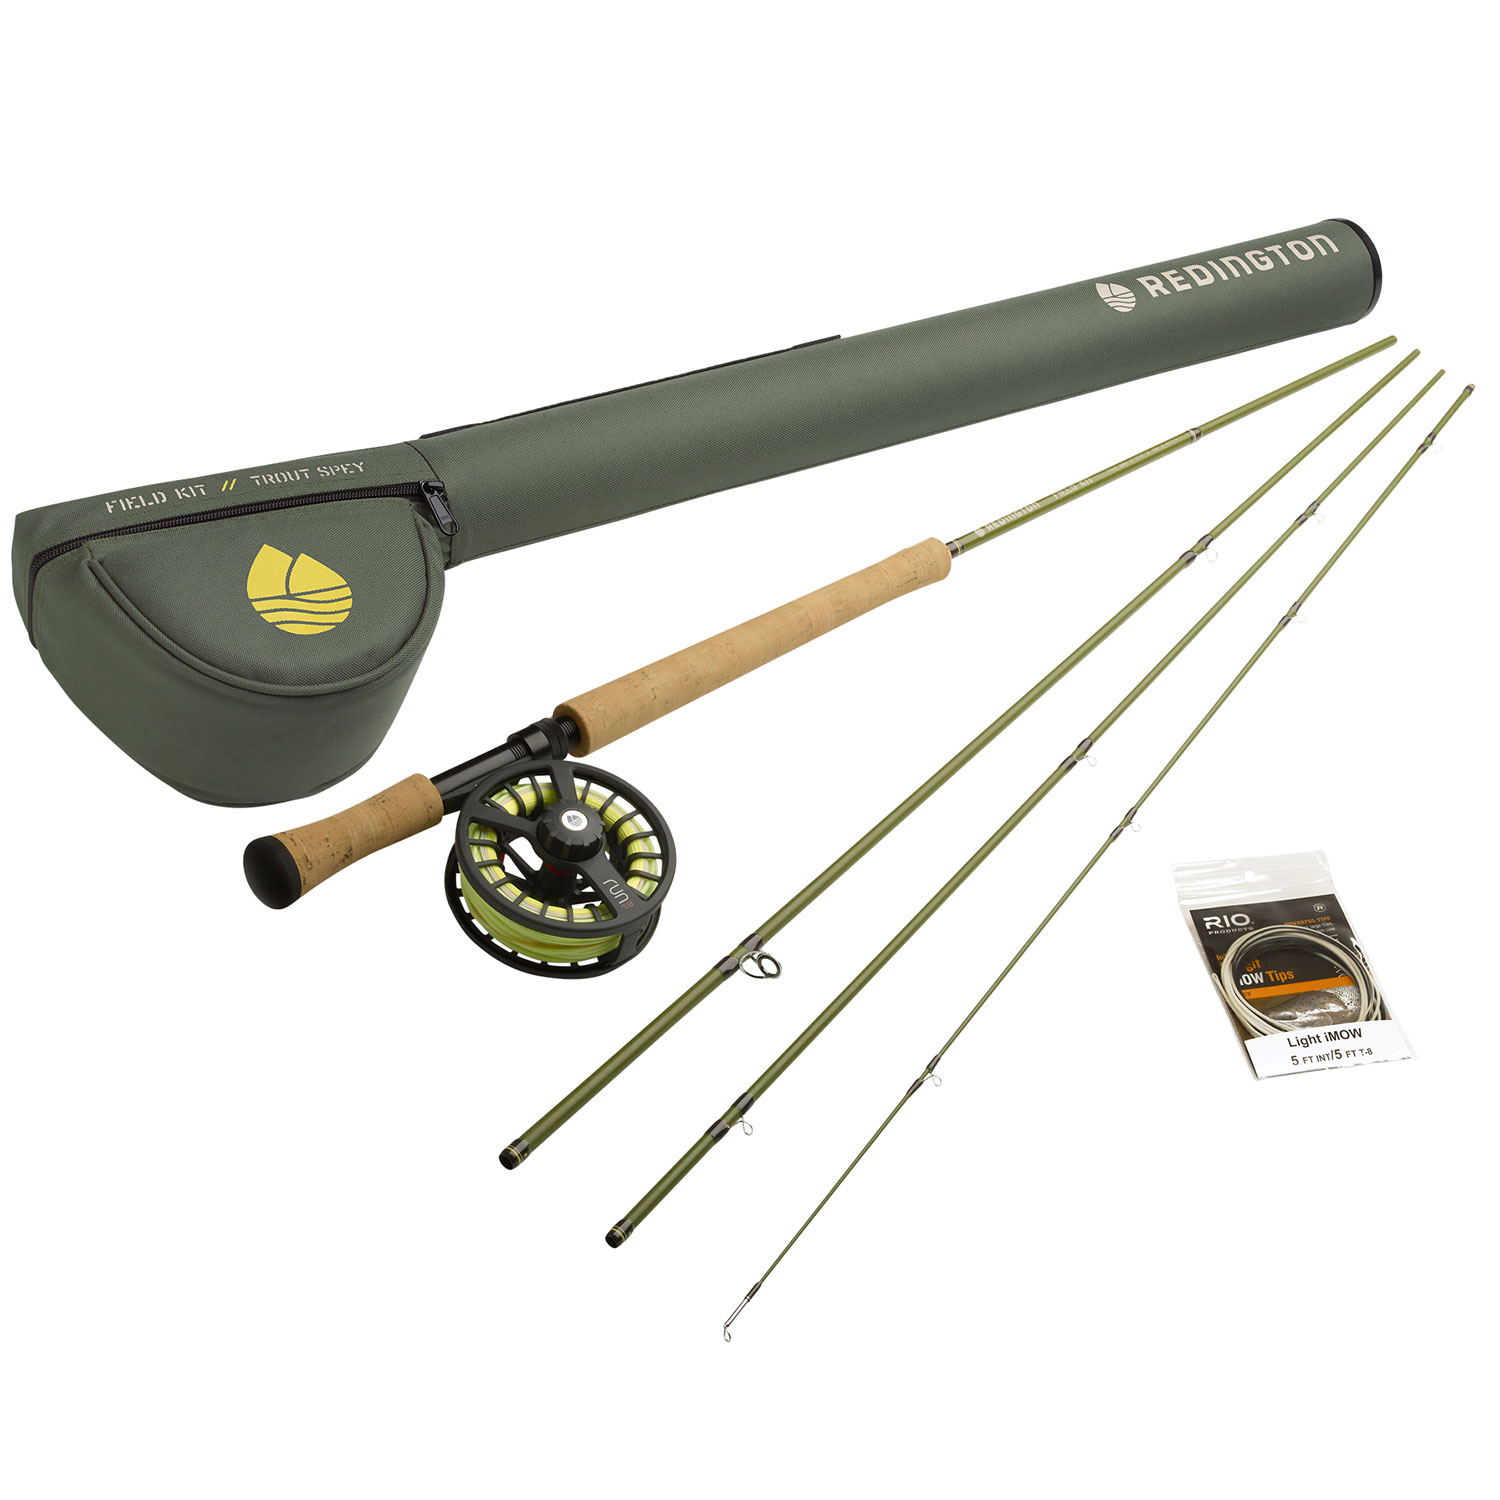 MengQi Carbon Fly Fishing Rod and Reel Combo Set - Complete Gear Kit for Anglers, Size: 68, Black